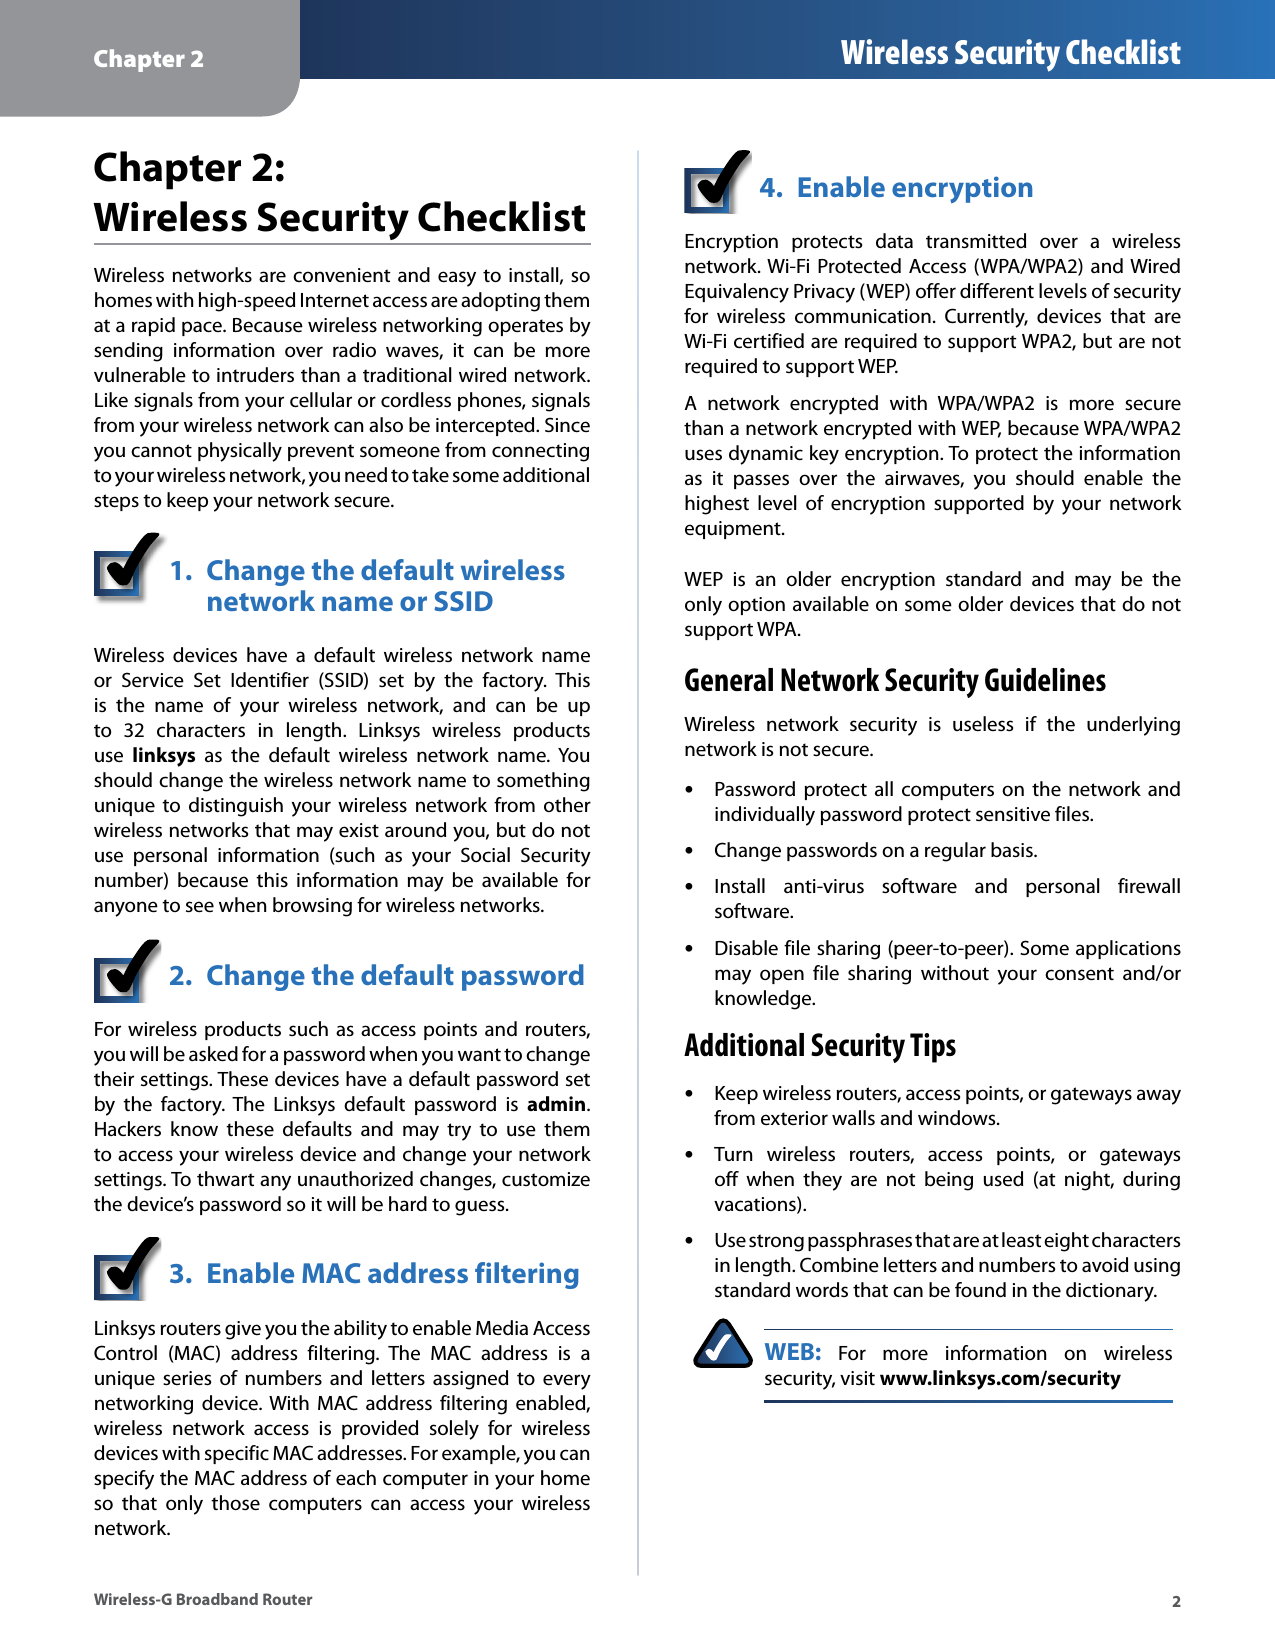 Chapter 2 Wireless Security Checklist Chapter 2: Wireless Security ChecklistWireless  networks  are convenient  and easy to install, so homes with high-speed Internet access are adopting them at a rapid pace. Because wireless networking operates by sending  information  over  radio  waves,  it  can  be  more vulnerable to intruders than a traditional wired network. Like signals from your cellular or cordless phones, signals from your wireless network can also be intercepted. Since you cannot physically prevent someone from connecting to your wireless network, you need to take some additional steps to keep your network secure. 1.  Change the default wireless network name or SSID Wireless  devices  have  a  default  wireless  network  name or  Service  Set  Identifier  (SSID)  set  by  the  factory.  This is  the  name  of  your  wireless  network,  and  can  be  up to  32  characters  in  length.  Linksys  wireless  products use  linksys  as  the  default  wireless  network  name.  You should change the wireless network name to something unique  to  distinguish  your wireless  network  from  other wireless networks that may exist around you, but do not use  personal  information  (such  as  your  Social  Security number)  because  this  information  may  be  available  for anyone to see when browsing for wireless networks. 2.  Change the default password For wireless products such as  access points and routers, you will be asked for a password when you want to change their settings. These devices have a default password set by  the  factory.  The  Linksys  default  password  is  admin. Hackers  know  these  defaults  and  may  try  to  use  them to access your wireless device and change your network settings. To thwart any unauthorized changes, customize the device’s password so it will be hard to guess. 3.  Enable MAC address filtering Linksys routers give you the ability to enable Media Access Control  (MAC)  address  filtering.  The  MAC  address  is  a unique  series  of  numbers  and  letters  assigned  to  every networking  device. With  MAC address  filtering  enabled, wireless  network  access  is  provided  solely  for  wireless devices with specific MAC addresses. For example, you can specify the MAC address of each computer in your home so  that  only  those  computers  can  access  your  wireless network. 4.  Enable encryption Encryption  protects  data  transmitted  over  a  wireless network. Wi-Fi Protected Access (WPA/WPA2) and Wired Equivalency Privacy (WEP) offer different levels of security for  wireless  communication.  Currently,  devices  that  are Wi-Fi certified are required to support WPA2, but are not required to support WEP. A  network  encrypted  with  WPA/WPA2  is  more  secure than a network encrypted with WEP, because WPA/WPA2 uses dynamic key encryption. To protect the information as  it  passes  over  the  airwaves,  you  should  enable  the highest  level  of  encryption  supported  by  your  network equipment. WEP  is  an  older  encryption  standard  and  may  be  the only option available on some older devices that do not support WPA. General Network Security Guidelines Wireless  network  security  is  useless  if  the  underlying network is not secure. •Password protect  all  computers  on  the  network  and individually password protect sensitive files. •Change passwords on a regular basis. •Install  anti-virus  software  and  personal  firewall software. •Disable file sharing (peer-to-peer). Some applications may  open  file  sharing  without  your  consent  and/or knowledge. Additional Security Tips •Keep wireless routers, access points, or gateways away from exterior walls and windows. •Turn  wireless  routers,  access  points,  or  gateways off  when  they  are  not  being  used  (at  night,  during vacations). •Use strong passphrases that are at least eight characters in length. Combine letters and numbers to avoid using standard words that can be found in the dictionary. WEB:  For  more  information  on  wireless security, visit www.linksys.com/security Wireless-G Broadband Router  2 